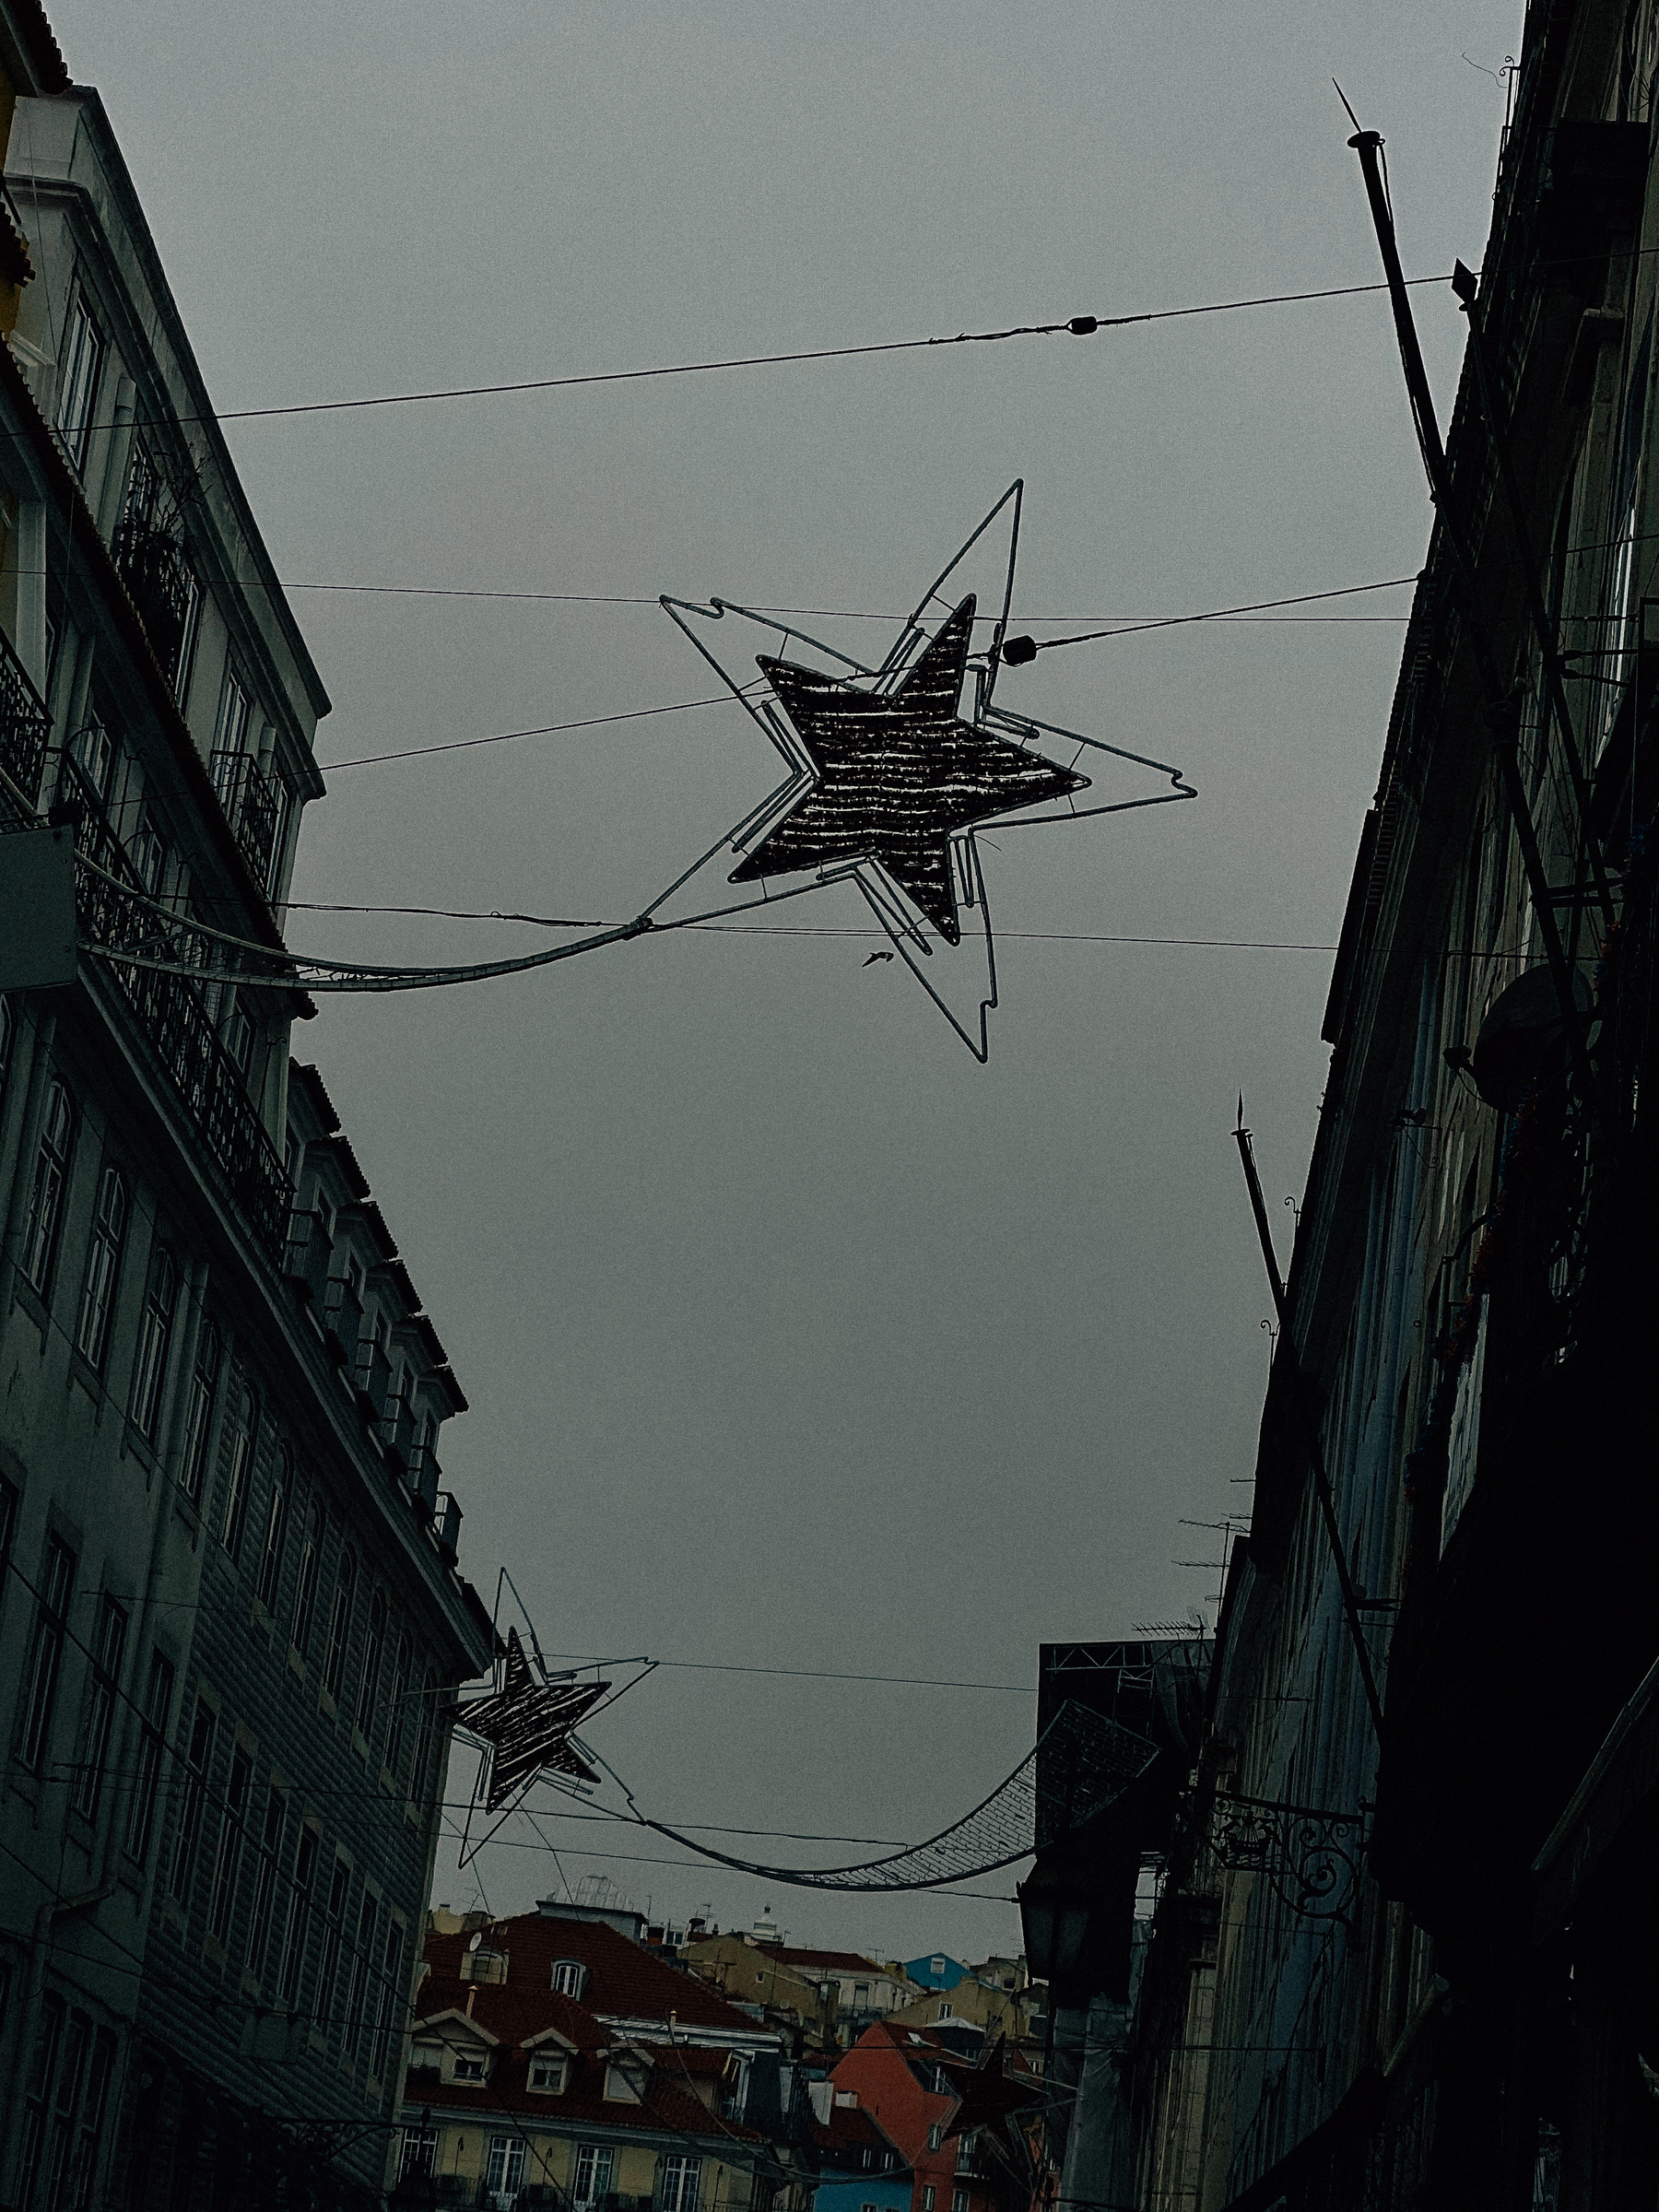 Street view with decorative star-shaped lights strung across wires above, between buildings, under an overcast sky.